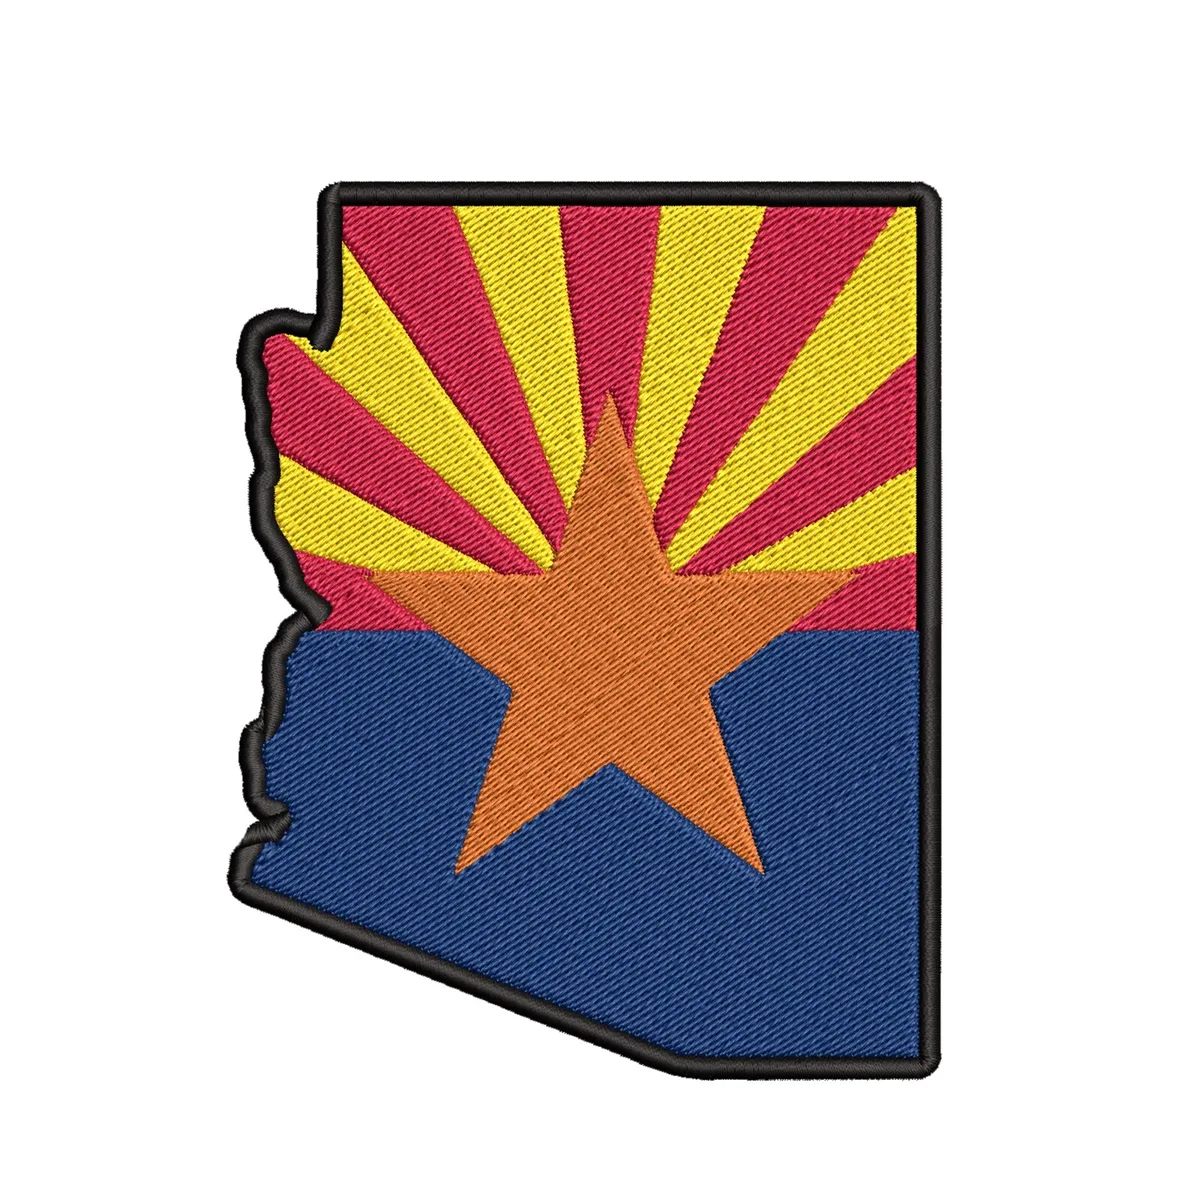 Arizona State Flag Blue Yellow Red Patch Embroidered Iron-on Badge DIY  Applique